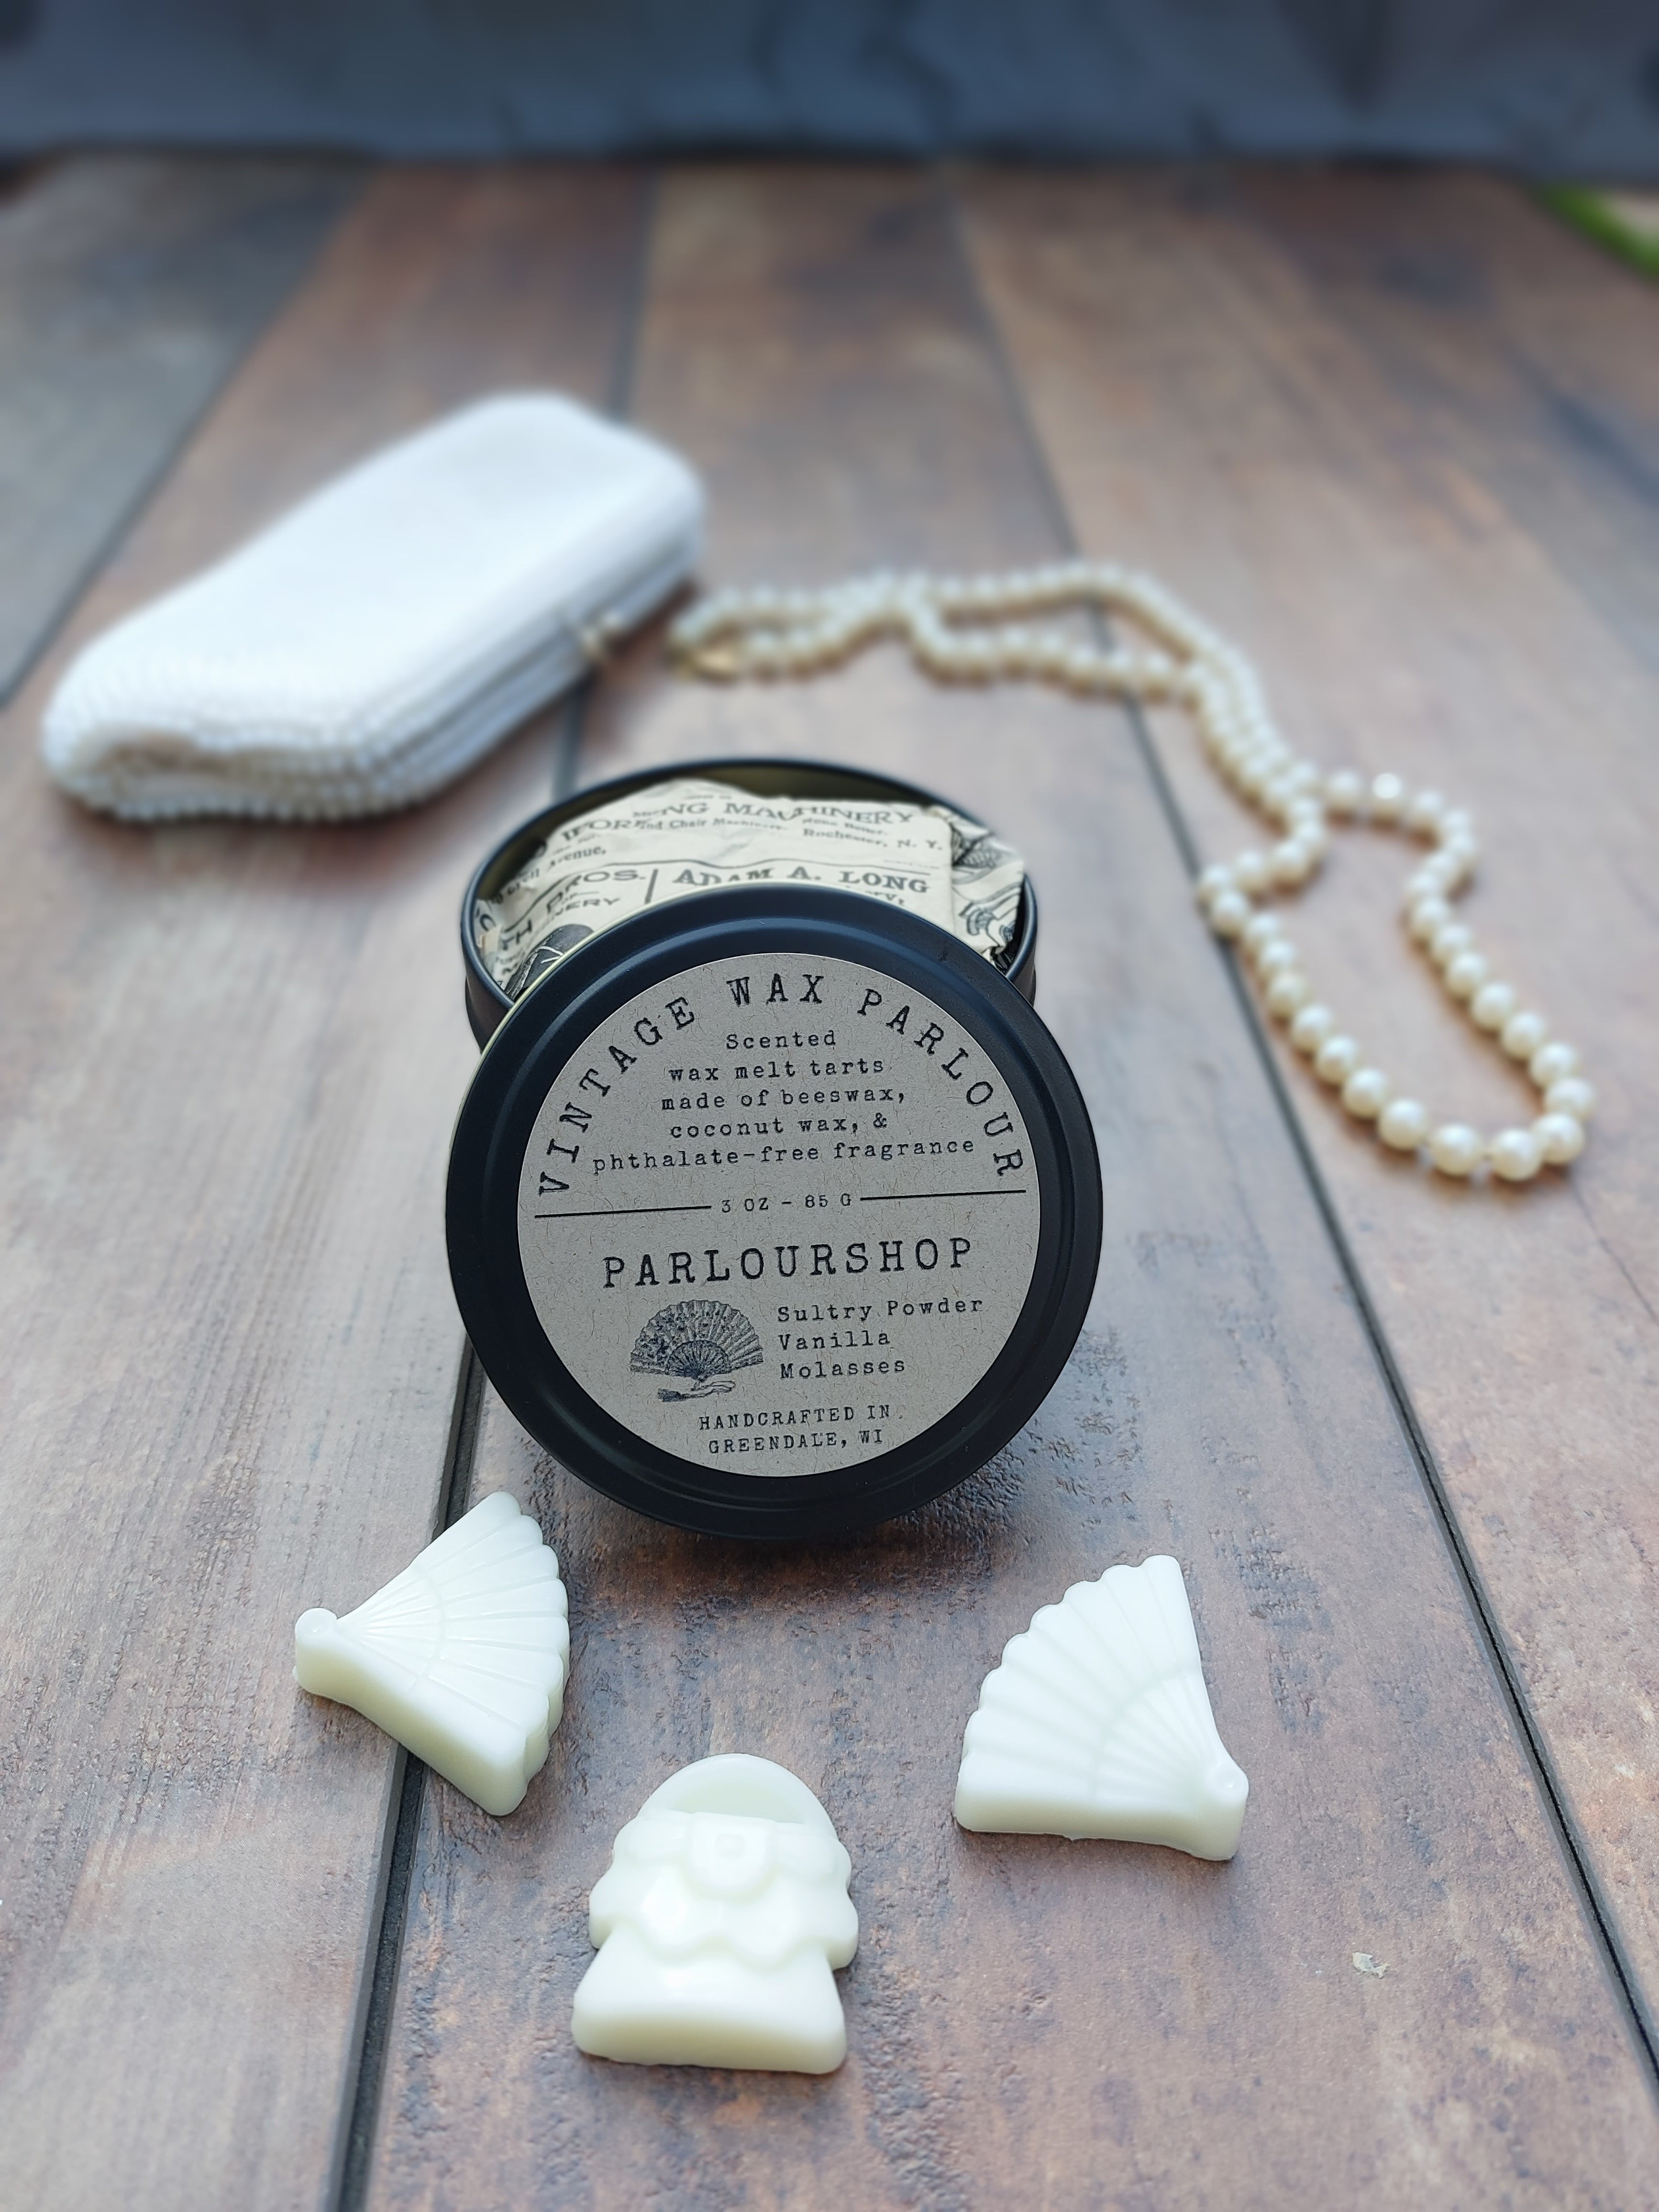 Coconut Wax Blend Wax Melts – Medieval Scents